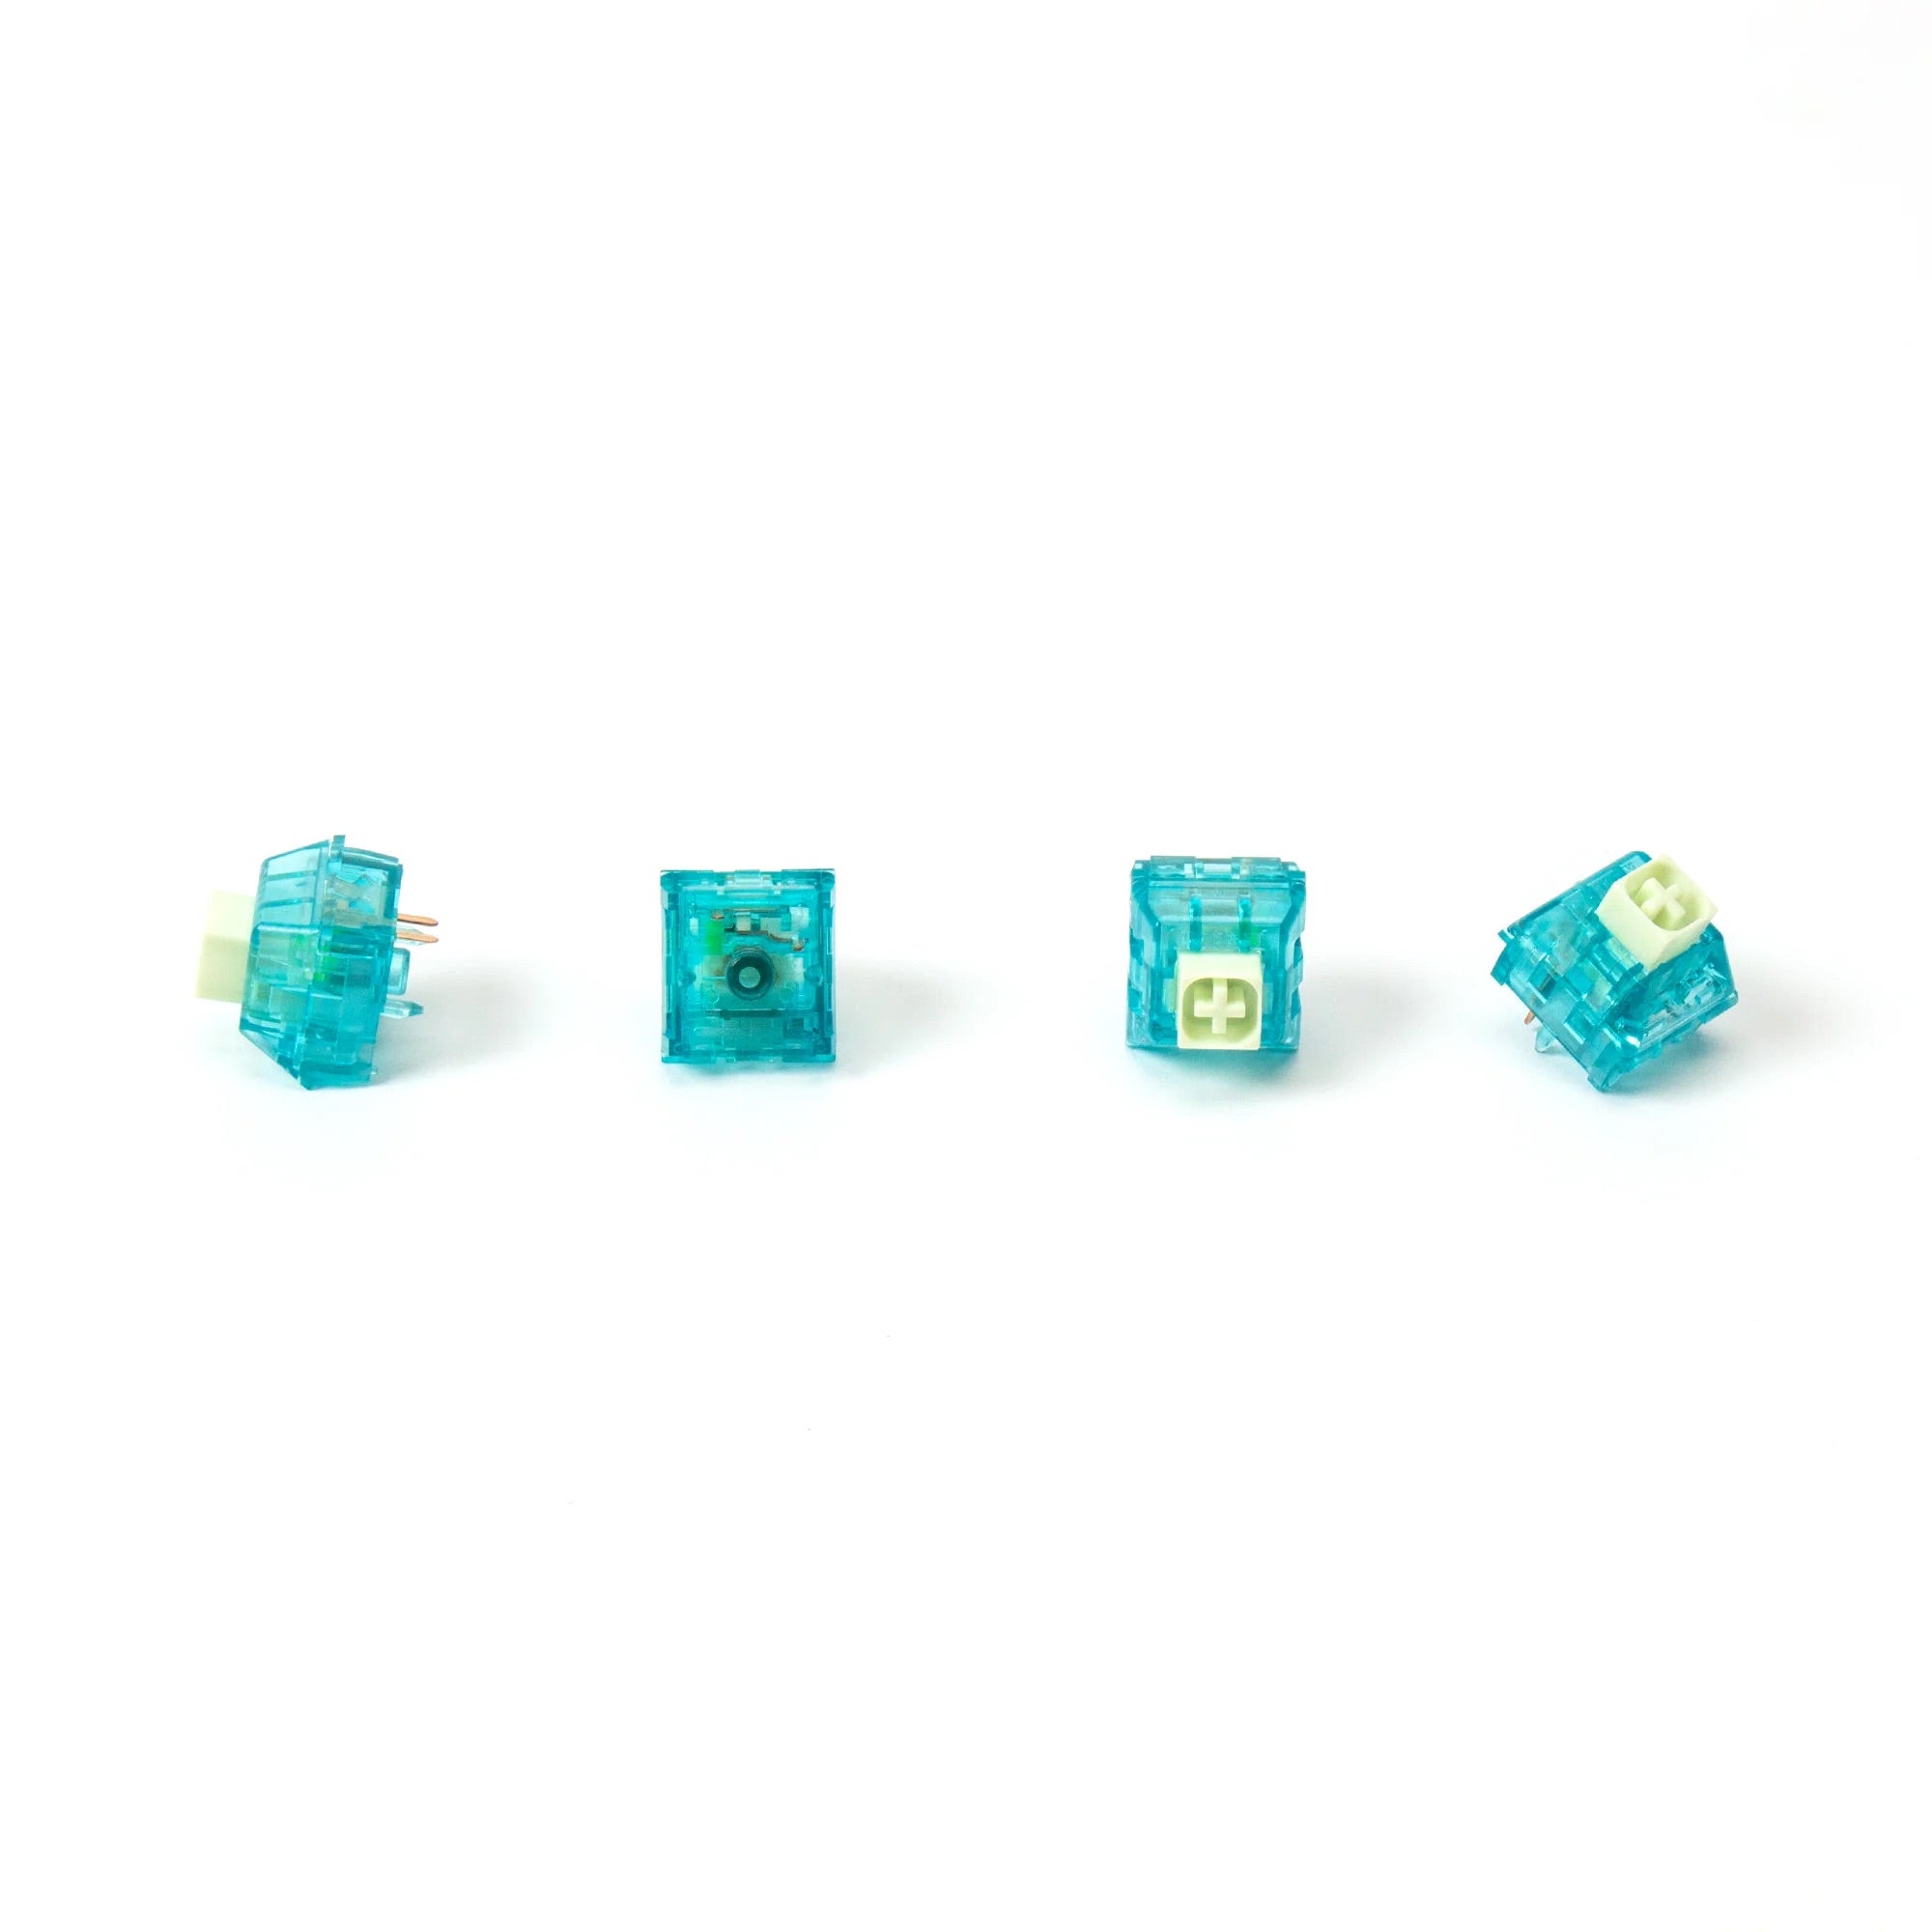 Glacier Kailh Box Summer Clicky 5-Pin Switches Set